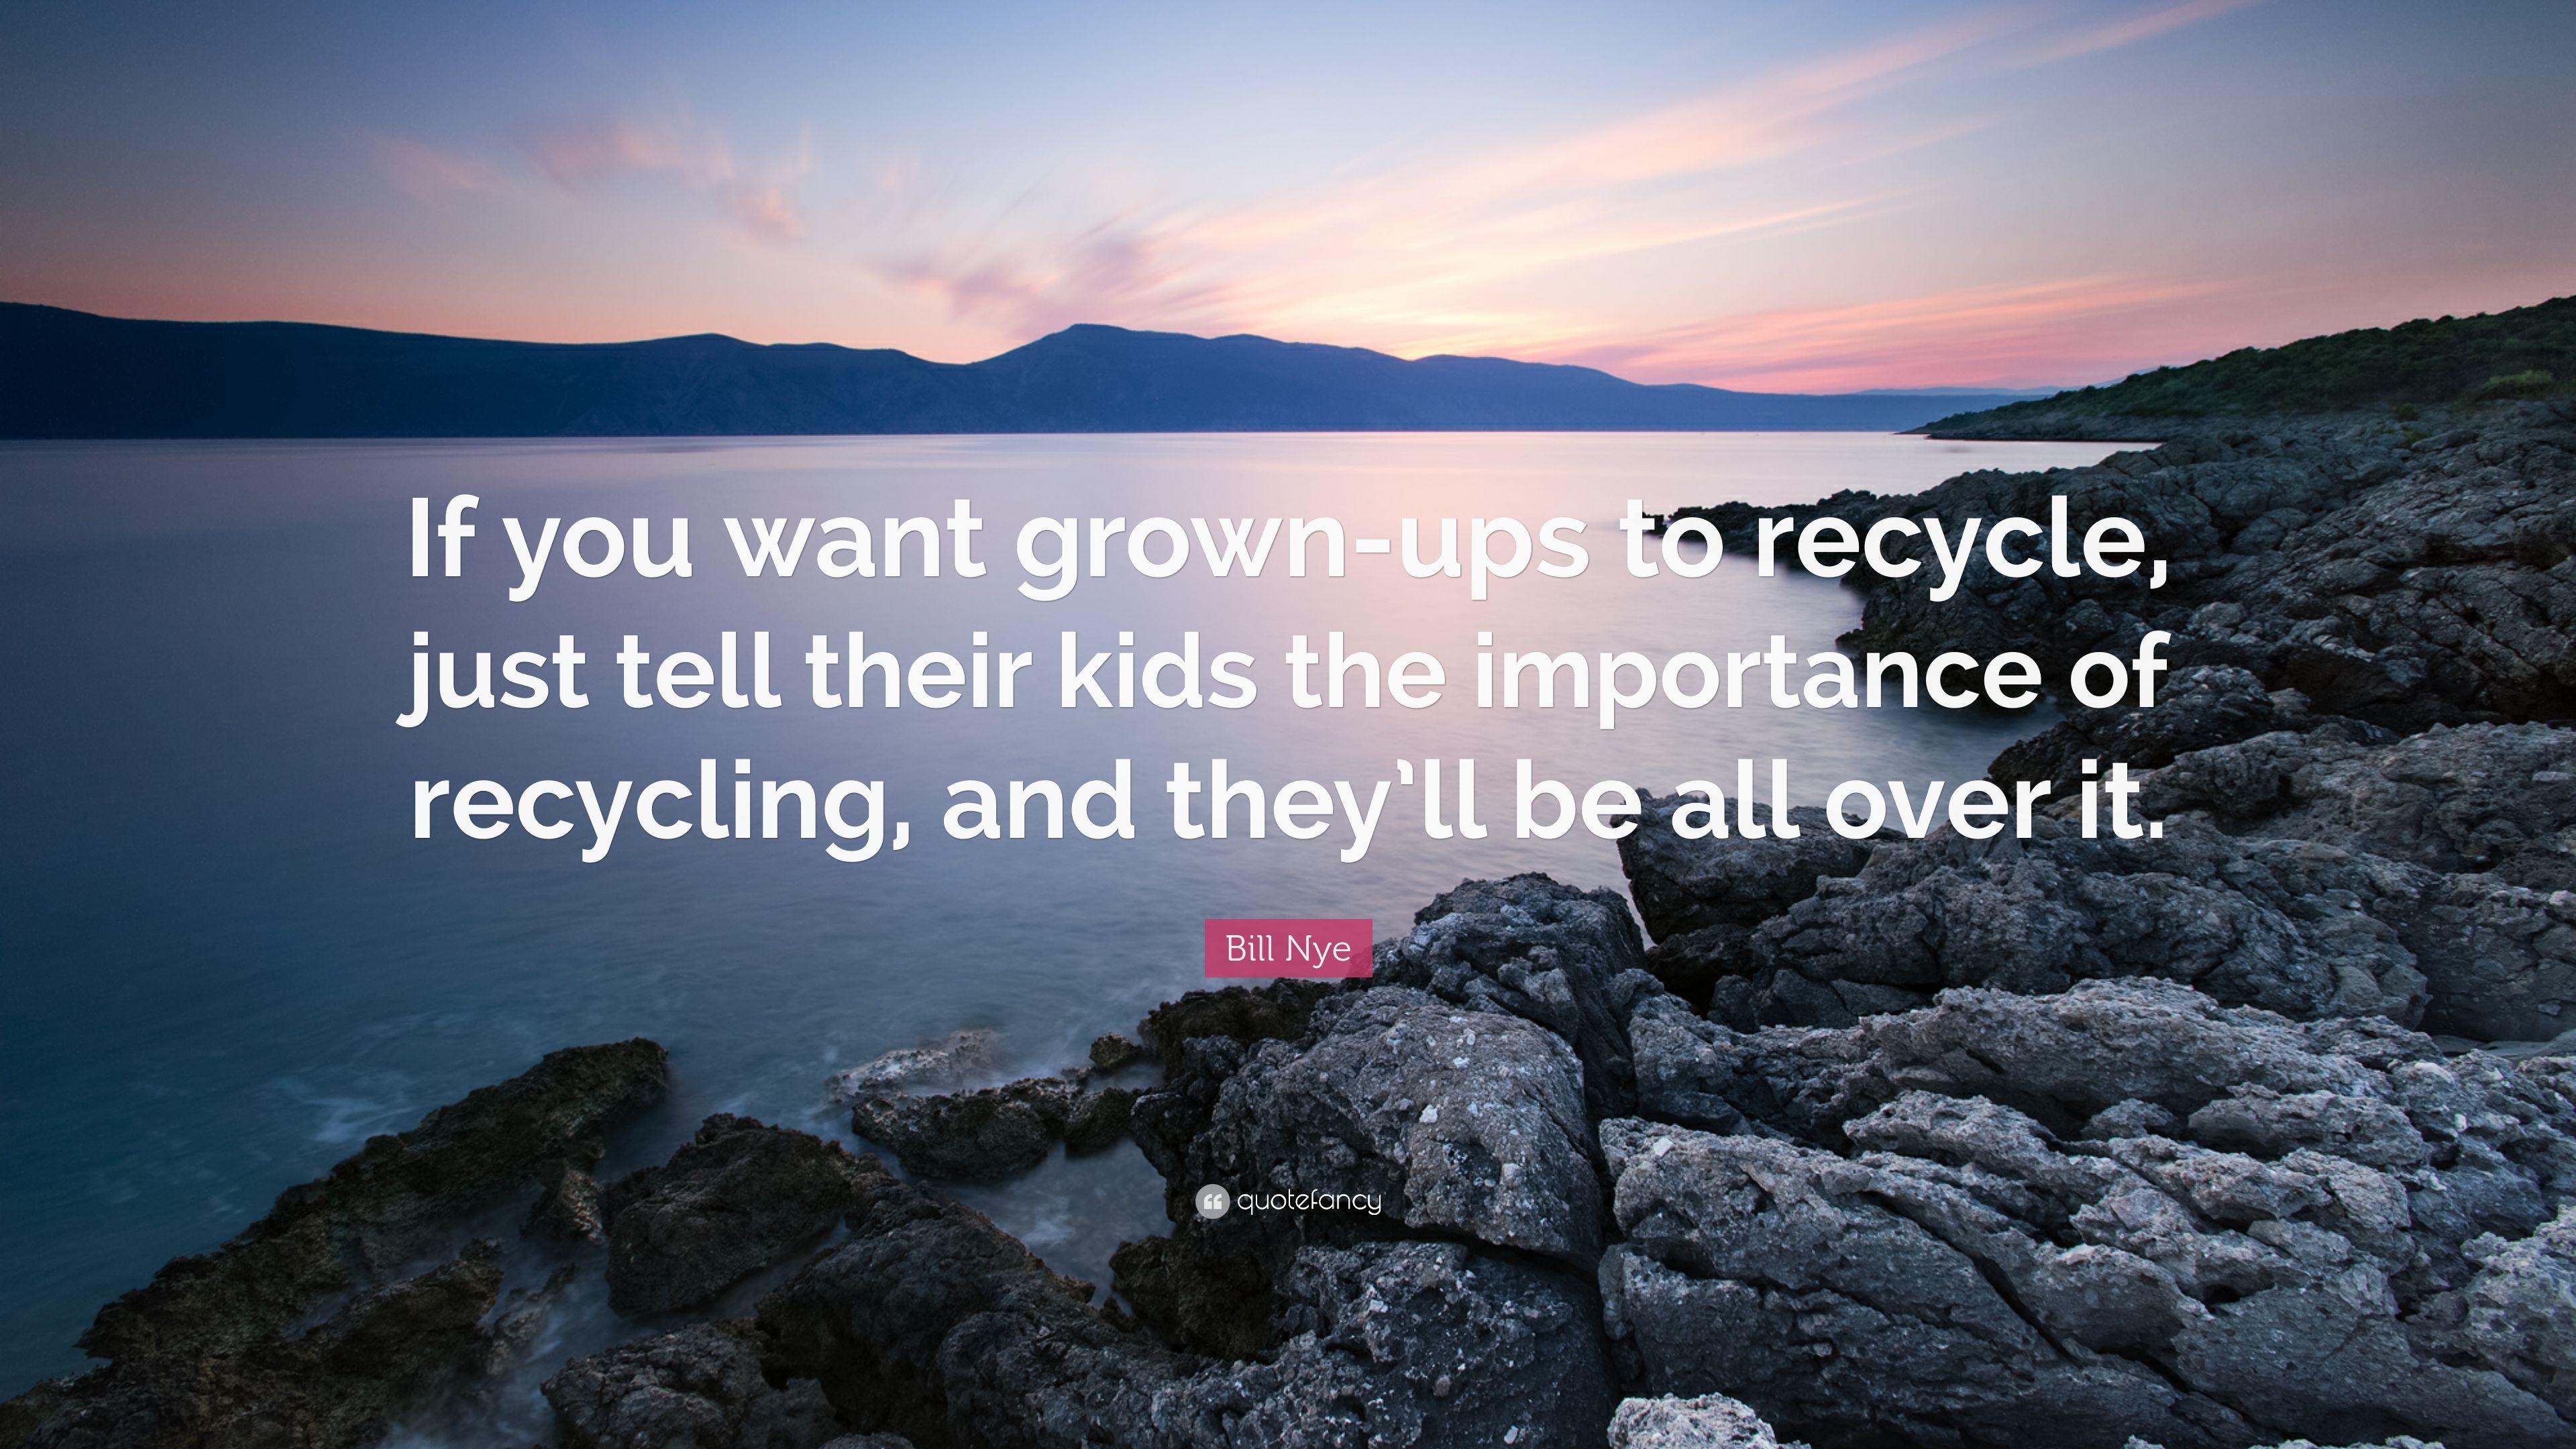 Bill Nye Quote: “If You Want Grown Ups To Recycle, Just Tell Their